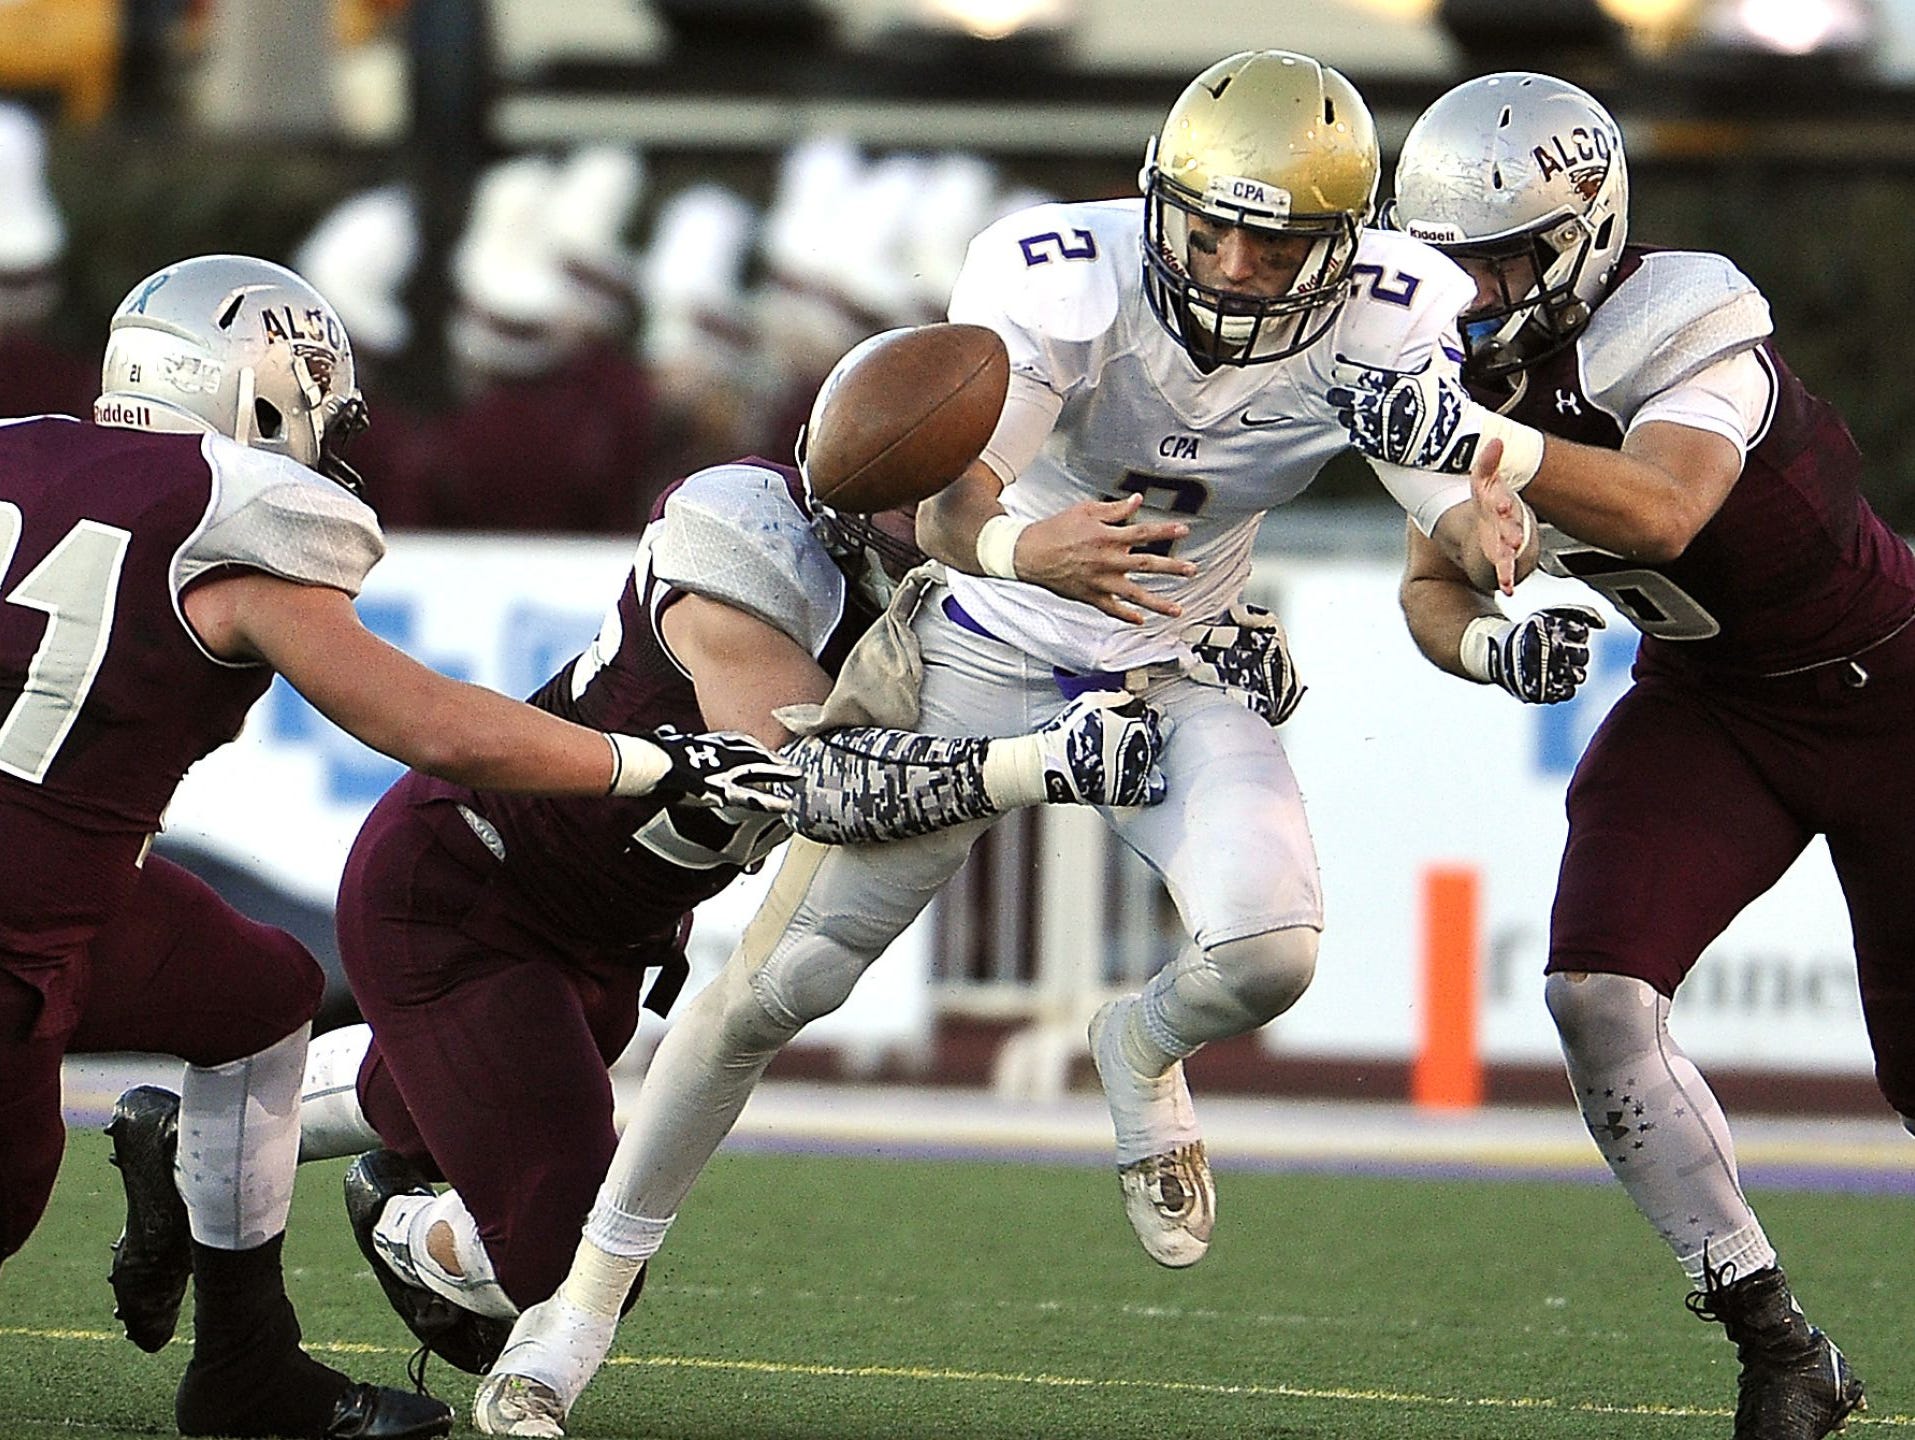 Pressured by Alcoa defenders, CPA quarterback Zack Weatherly loses the ball during Friday's 3A game. Alcoa beat CPA 20-0 in third straight title game meeting.